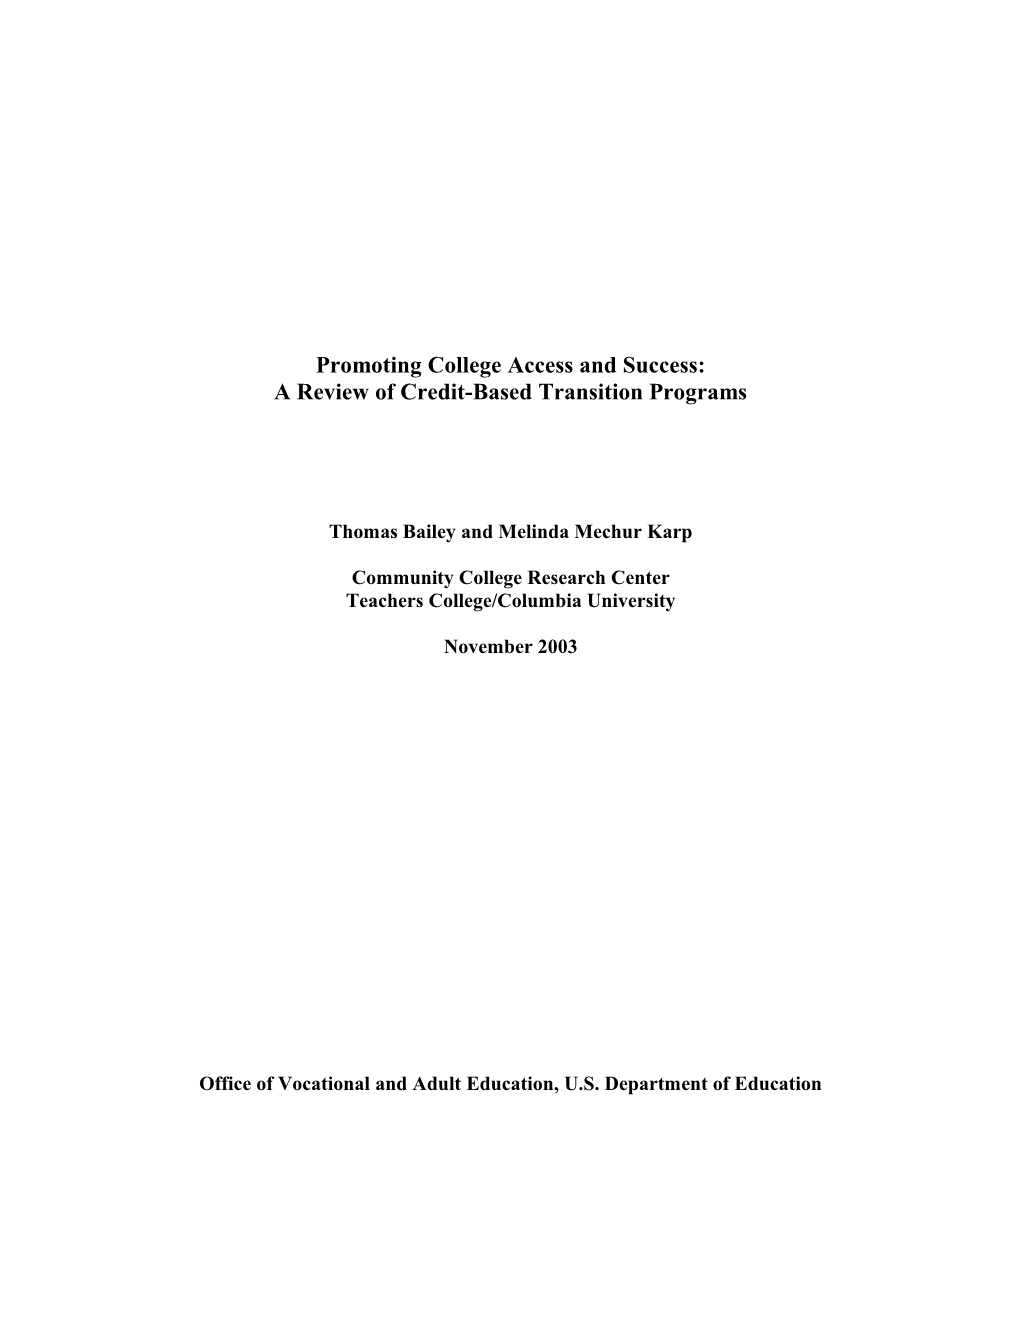 Promoting College Access and Success: a Review of Credit-Based Transition Programs (MS Word)